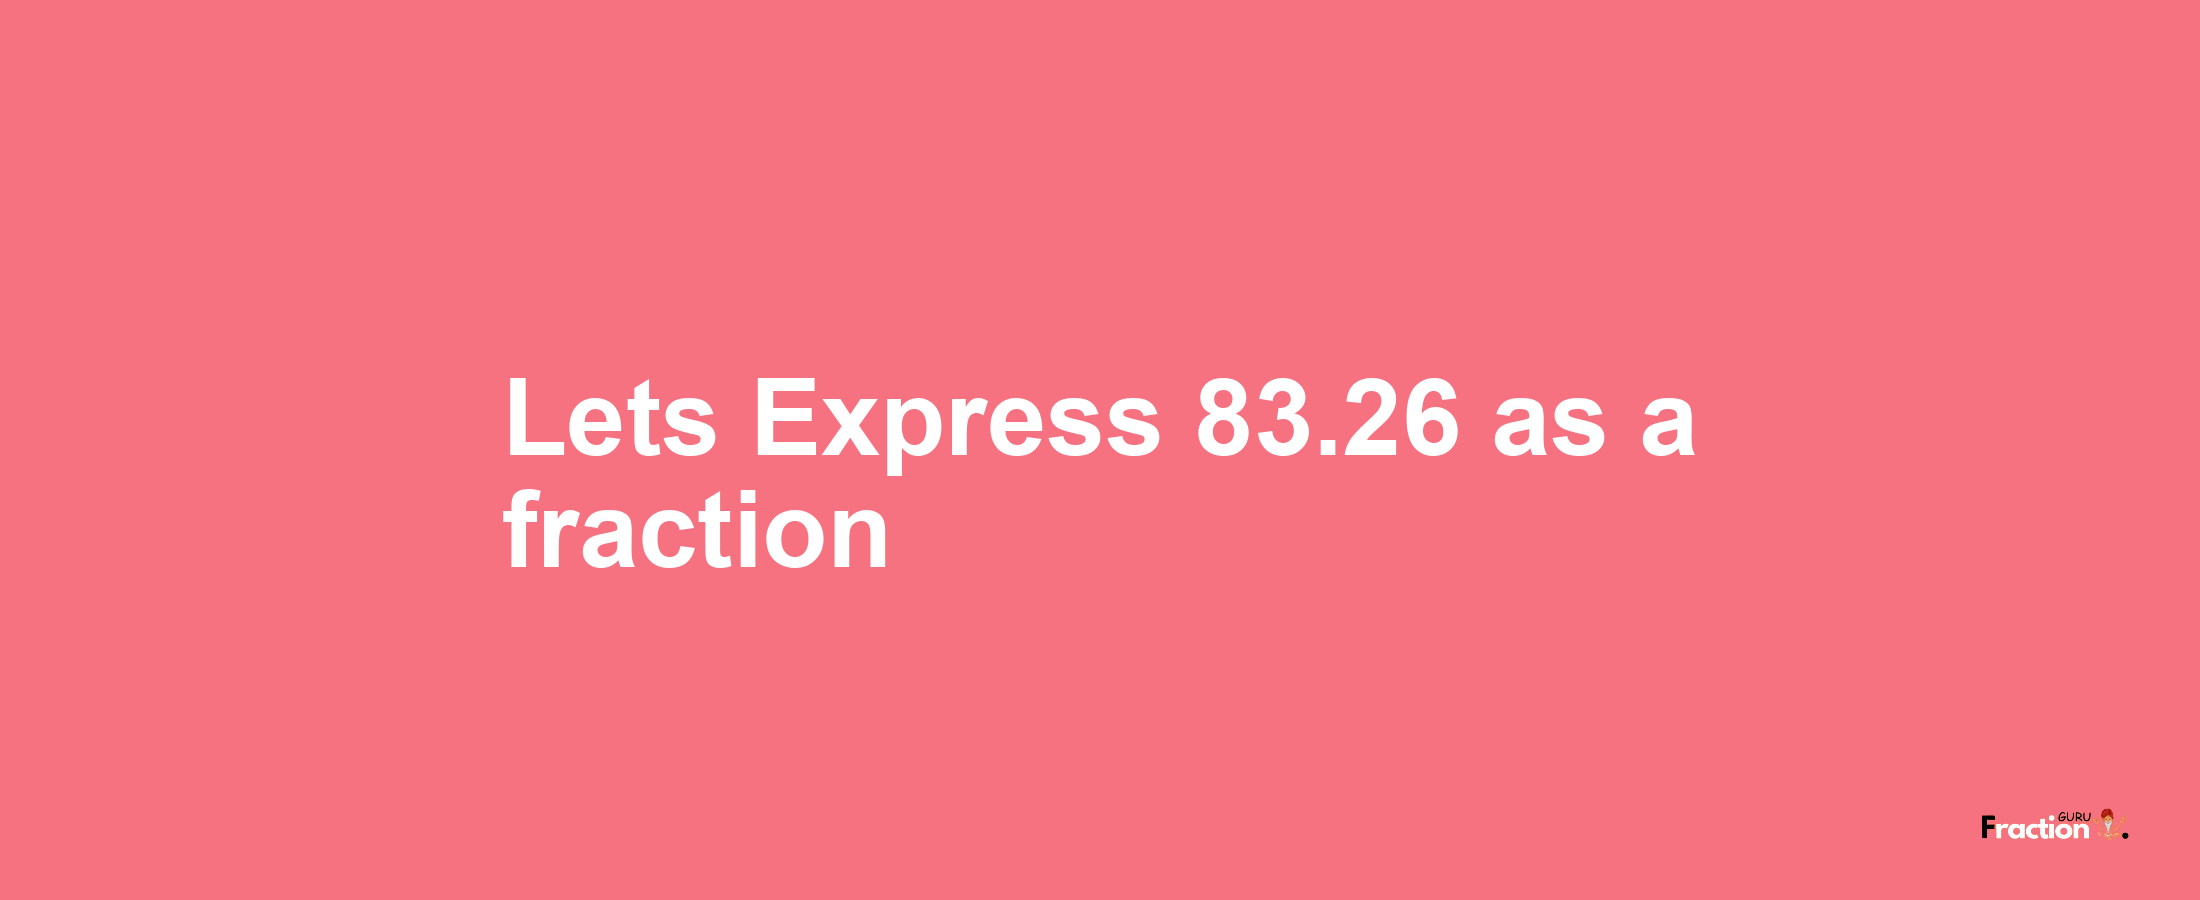 Lets Express 83.26 as afraction